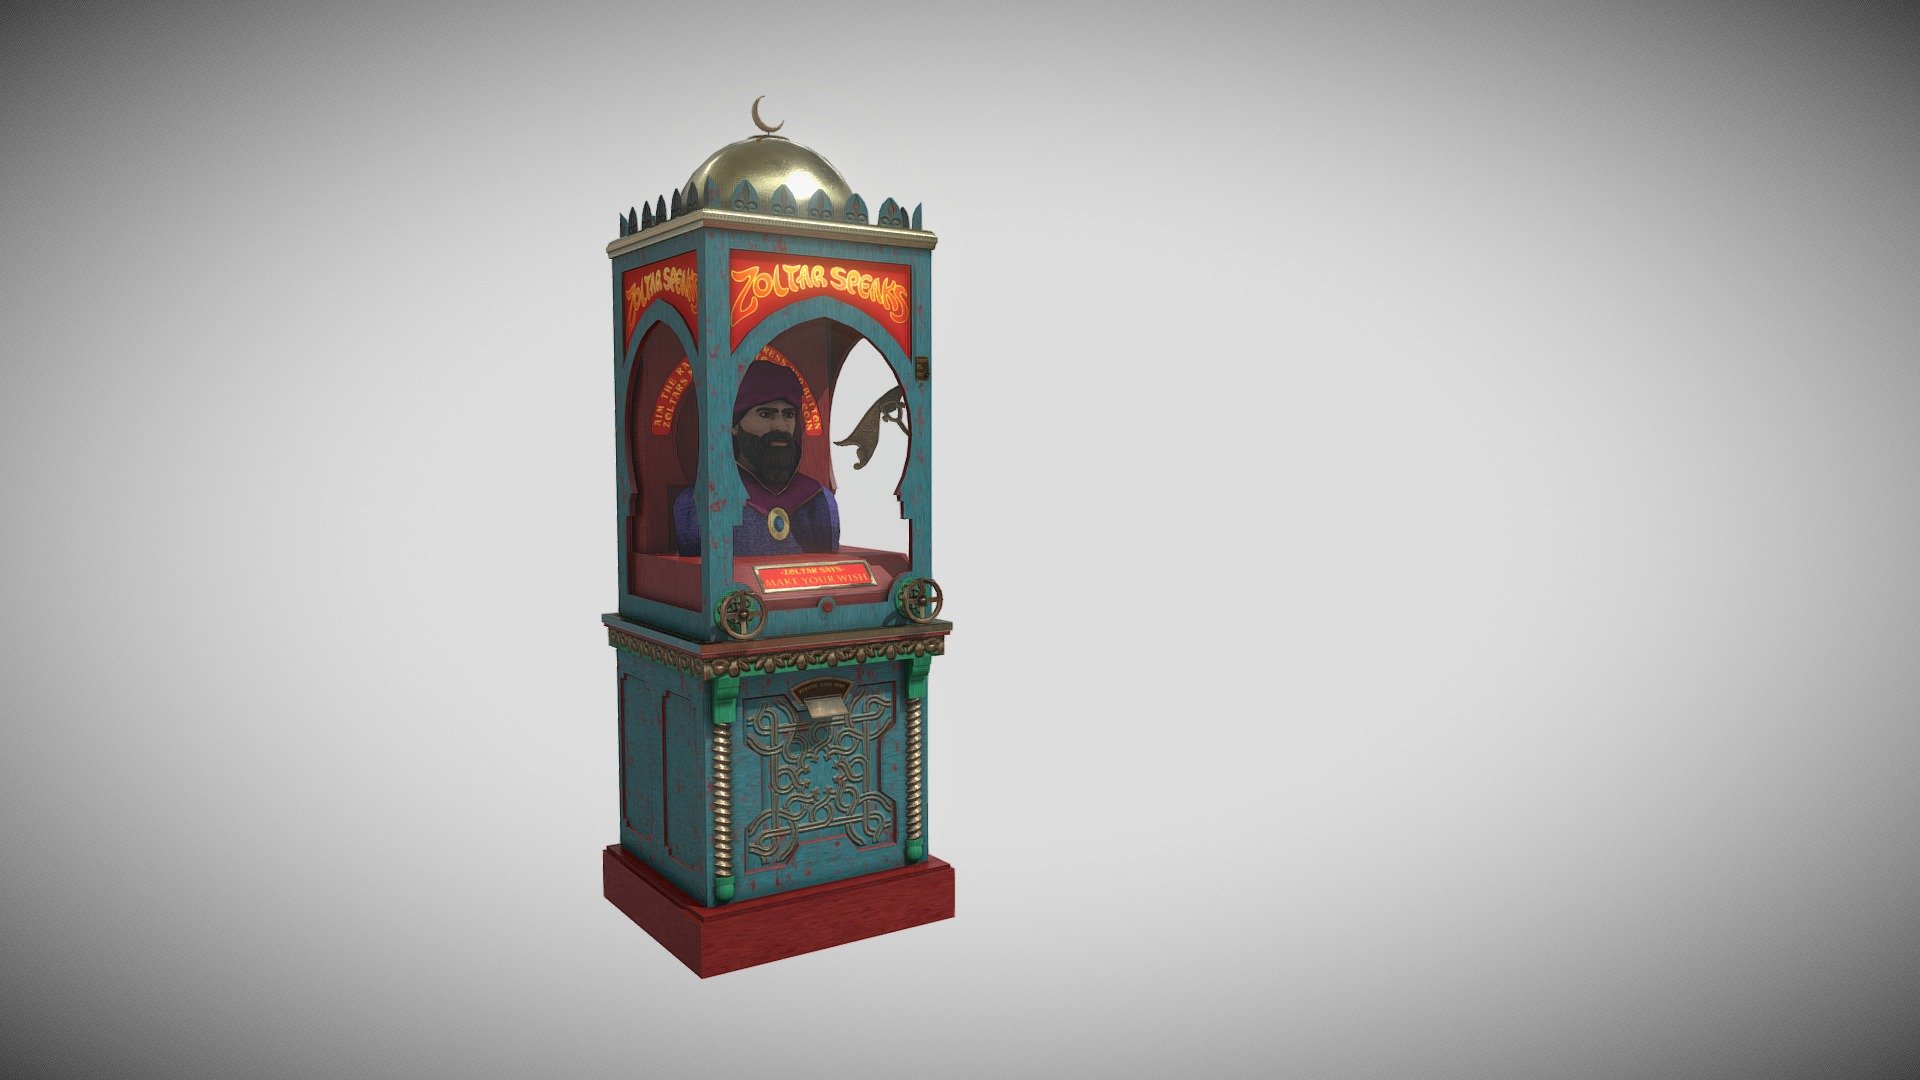 Zoltar speaks machine, inspired by the film BIG.
The actual Zoltan and some of the details differ slightly from the original 3d model